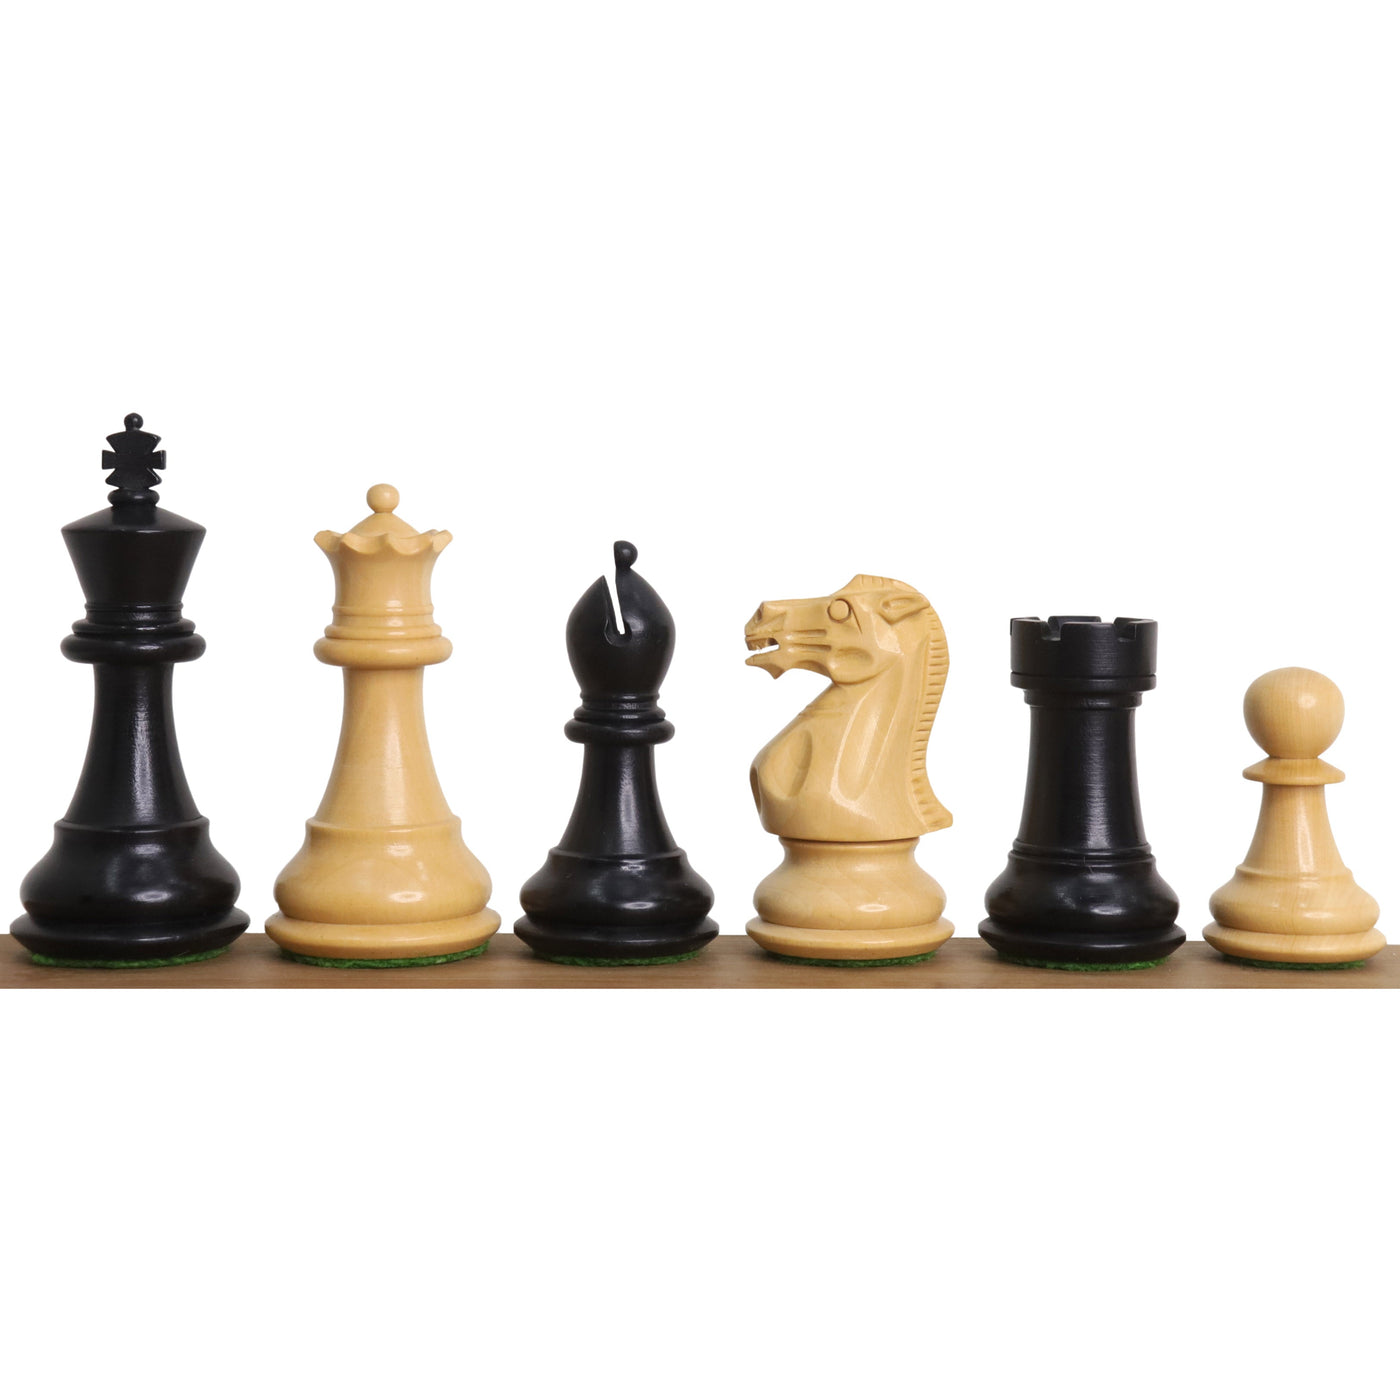 3" Professional Staunton Chess Set - Chess Pieces Only- Weighted Ebonized Boxwood